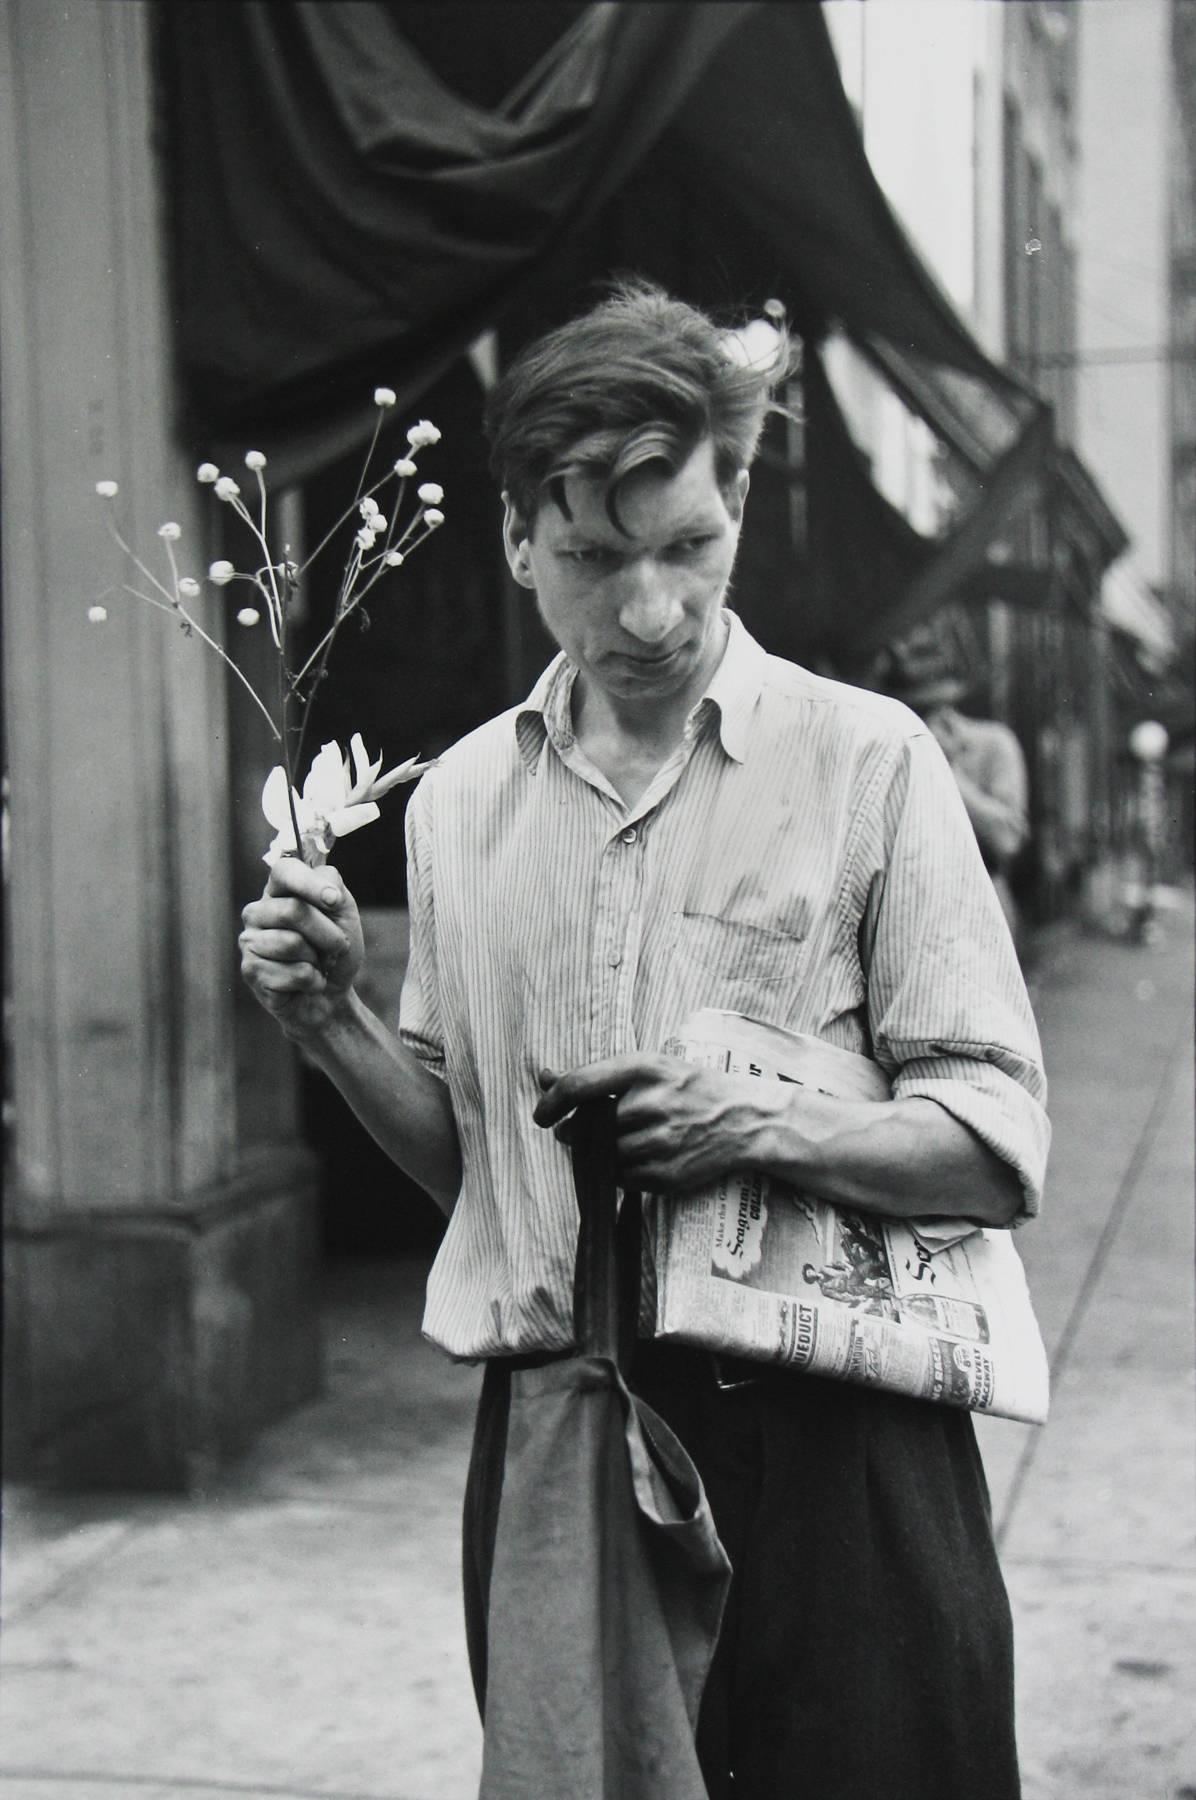 Louis Faurer Black and White Photograph - Eddie, New York, NY